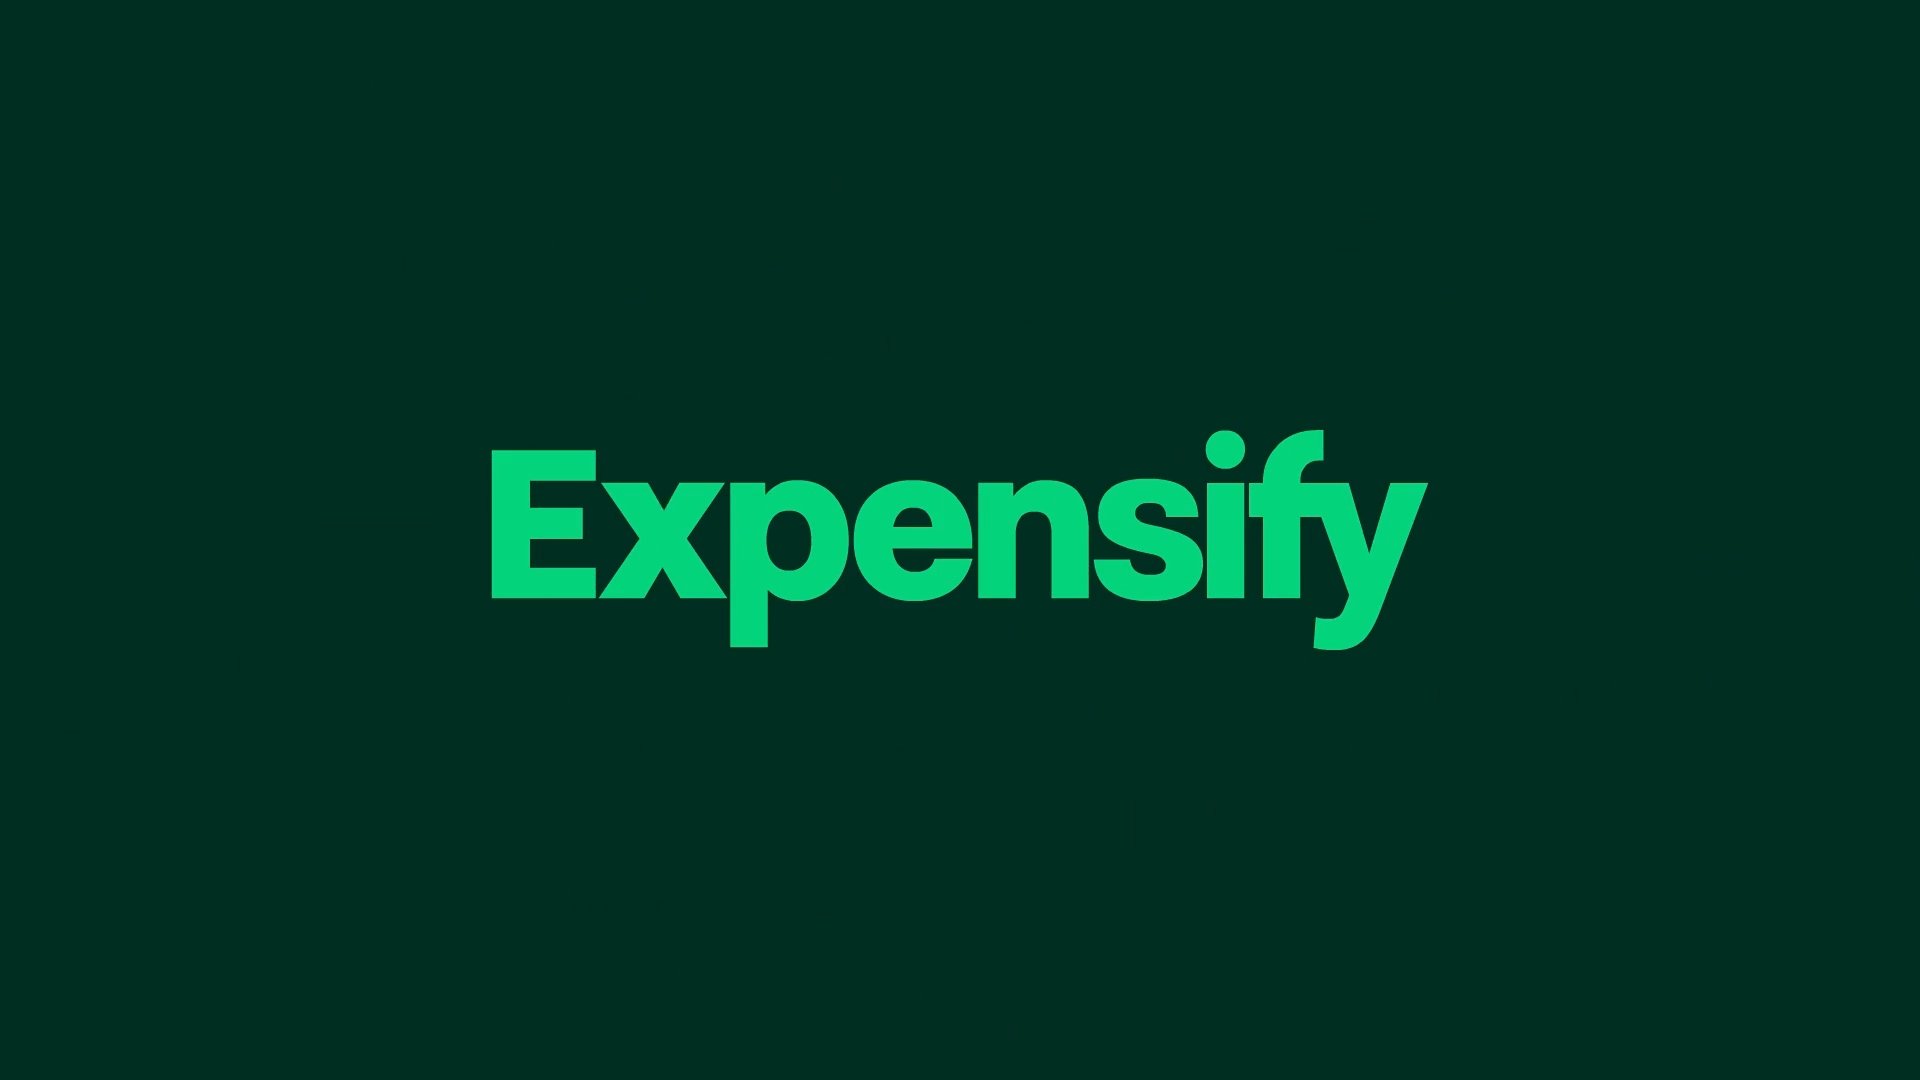 Brand identity, motion graphics, illustration and custom typeface for expense-reporting software Expensify designed by The Collected Works